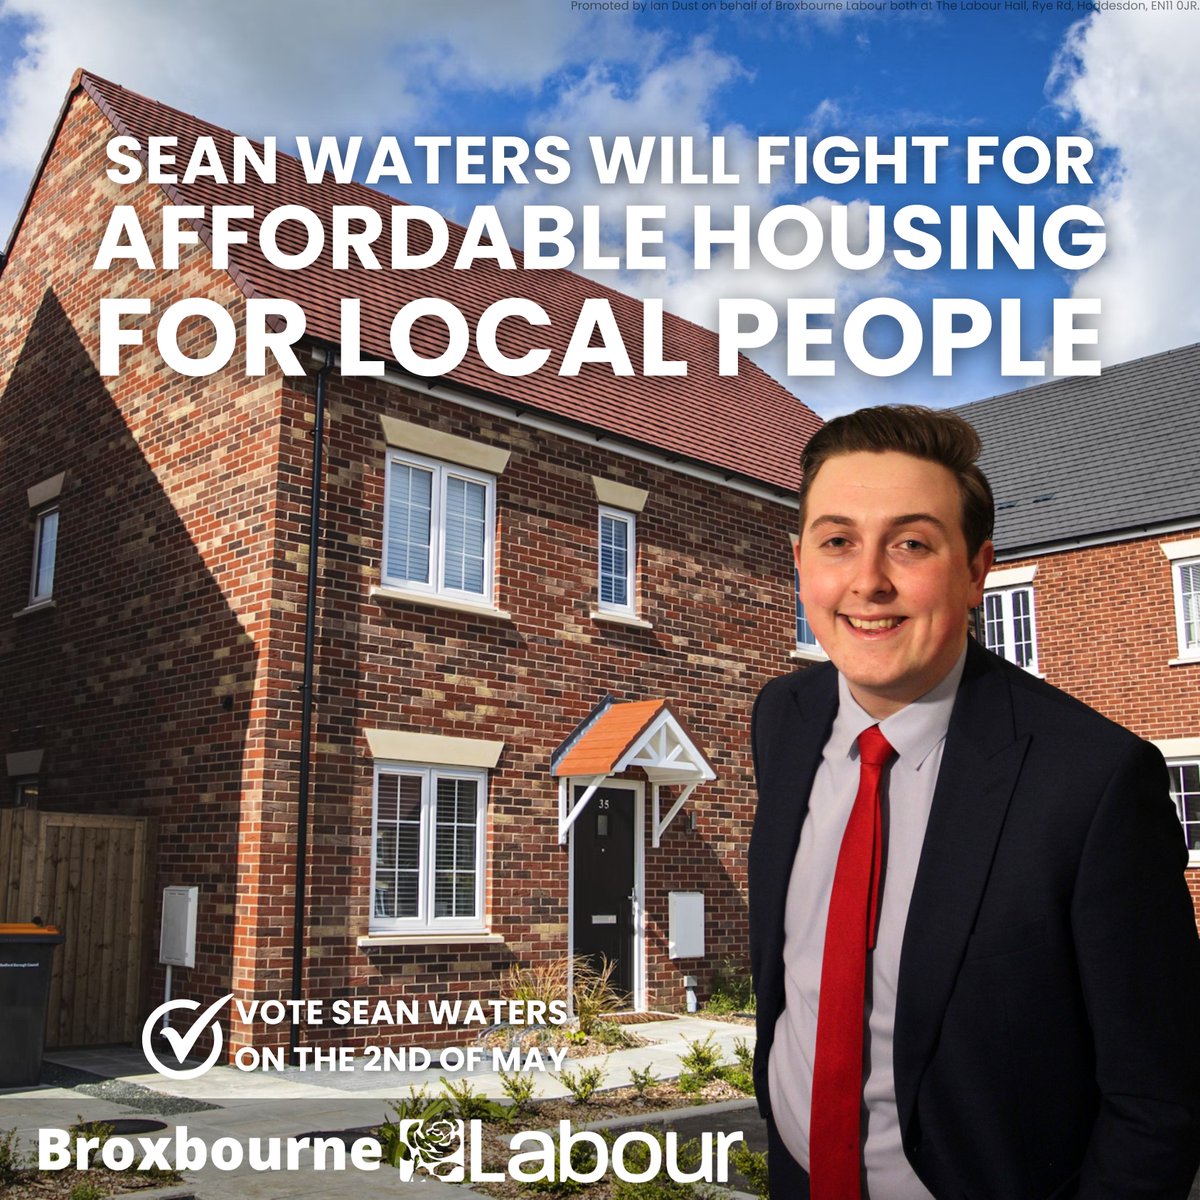 Re-elect Sean Waters as your Councillor for Waltham Cross on the 2nd of May so he can deliver for you!